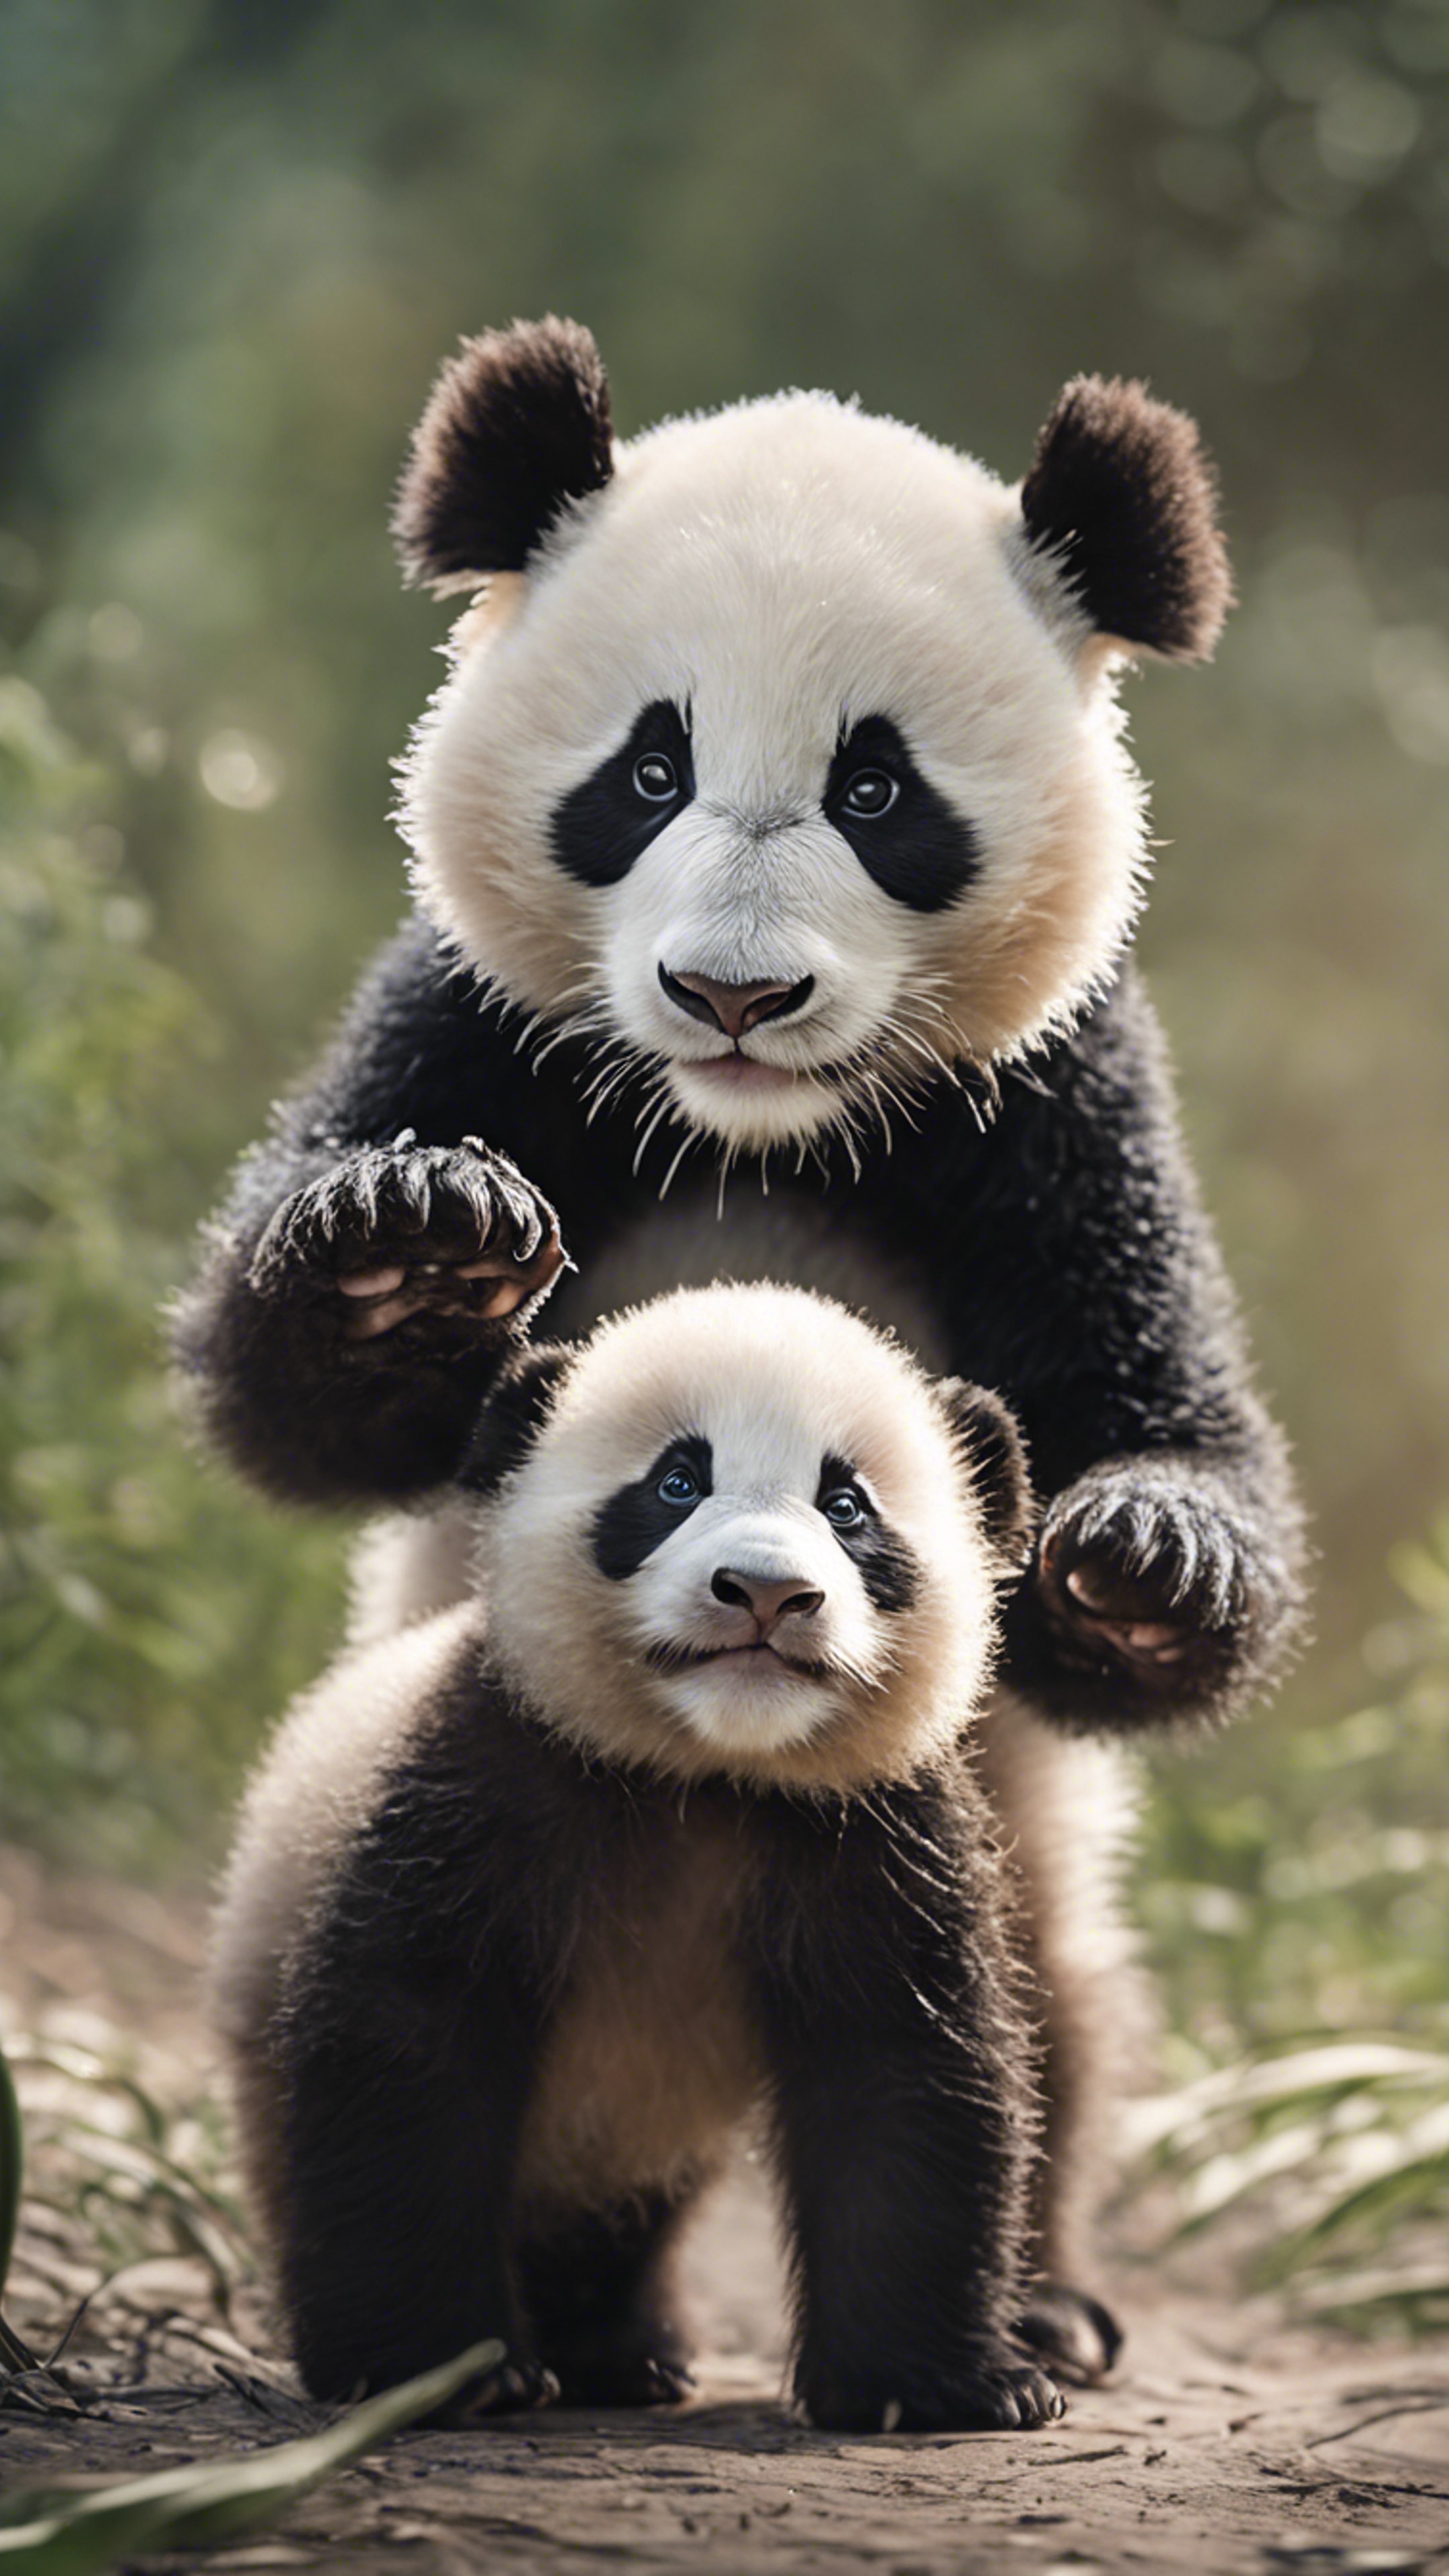 A newborn panda cub learning to walk, under the loving guidance of its mother. Hình nền[d326db7fc4d14111aedf]